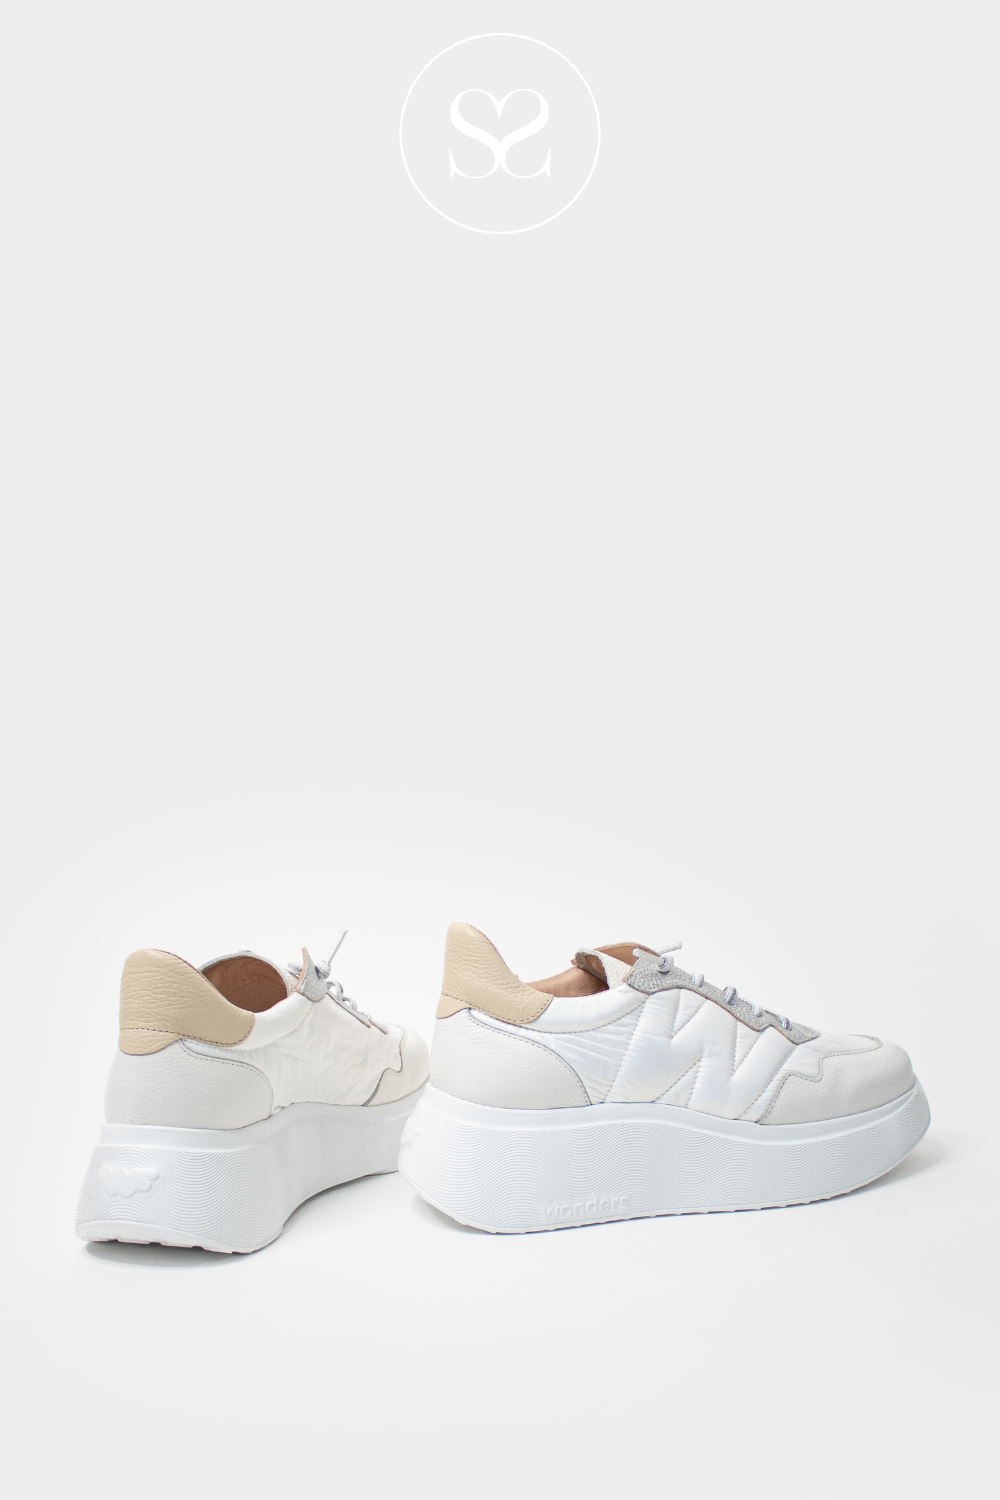 WONDERS A-3602 WHITE LEATHER CHUNKY PULL ON TRAINERS